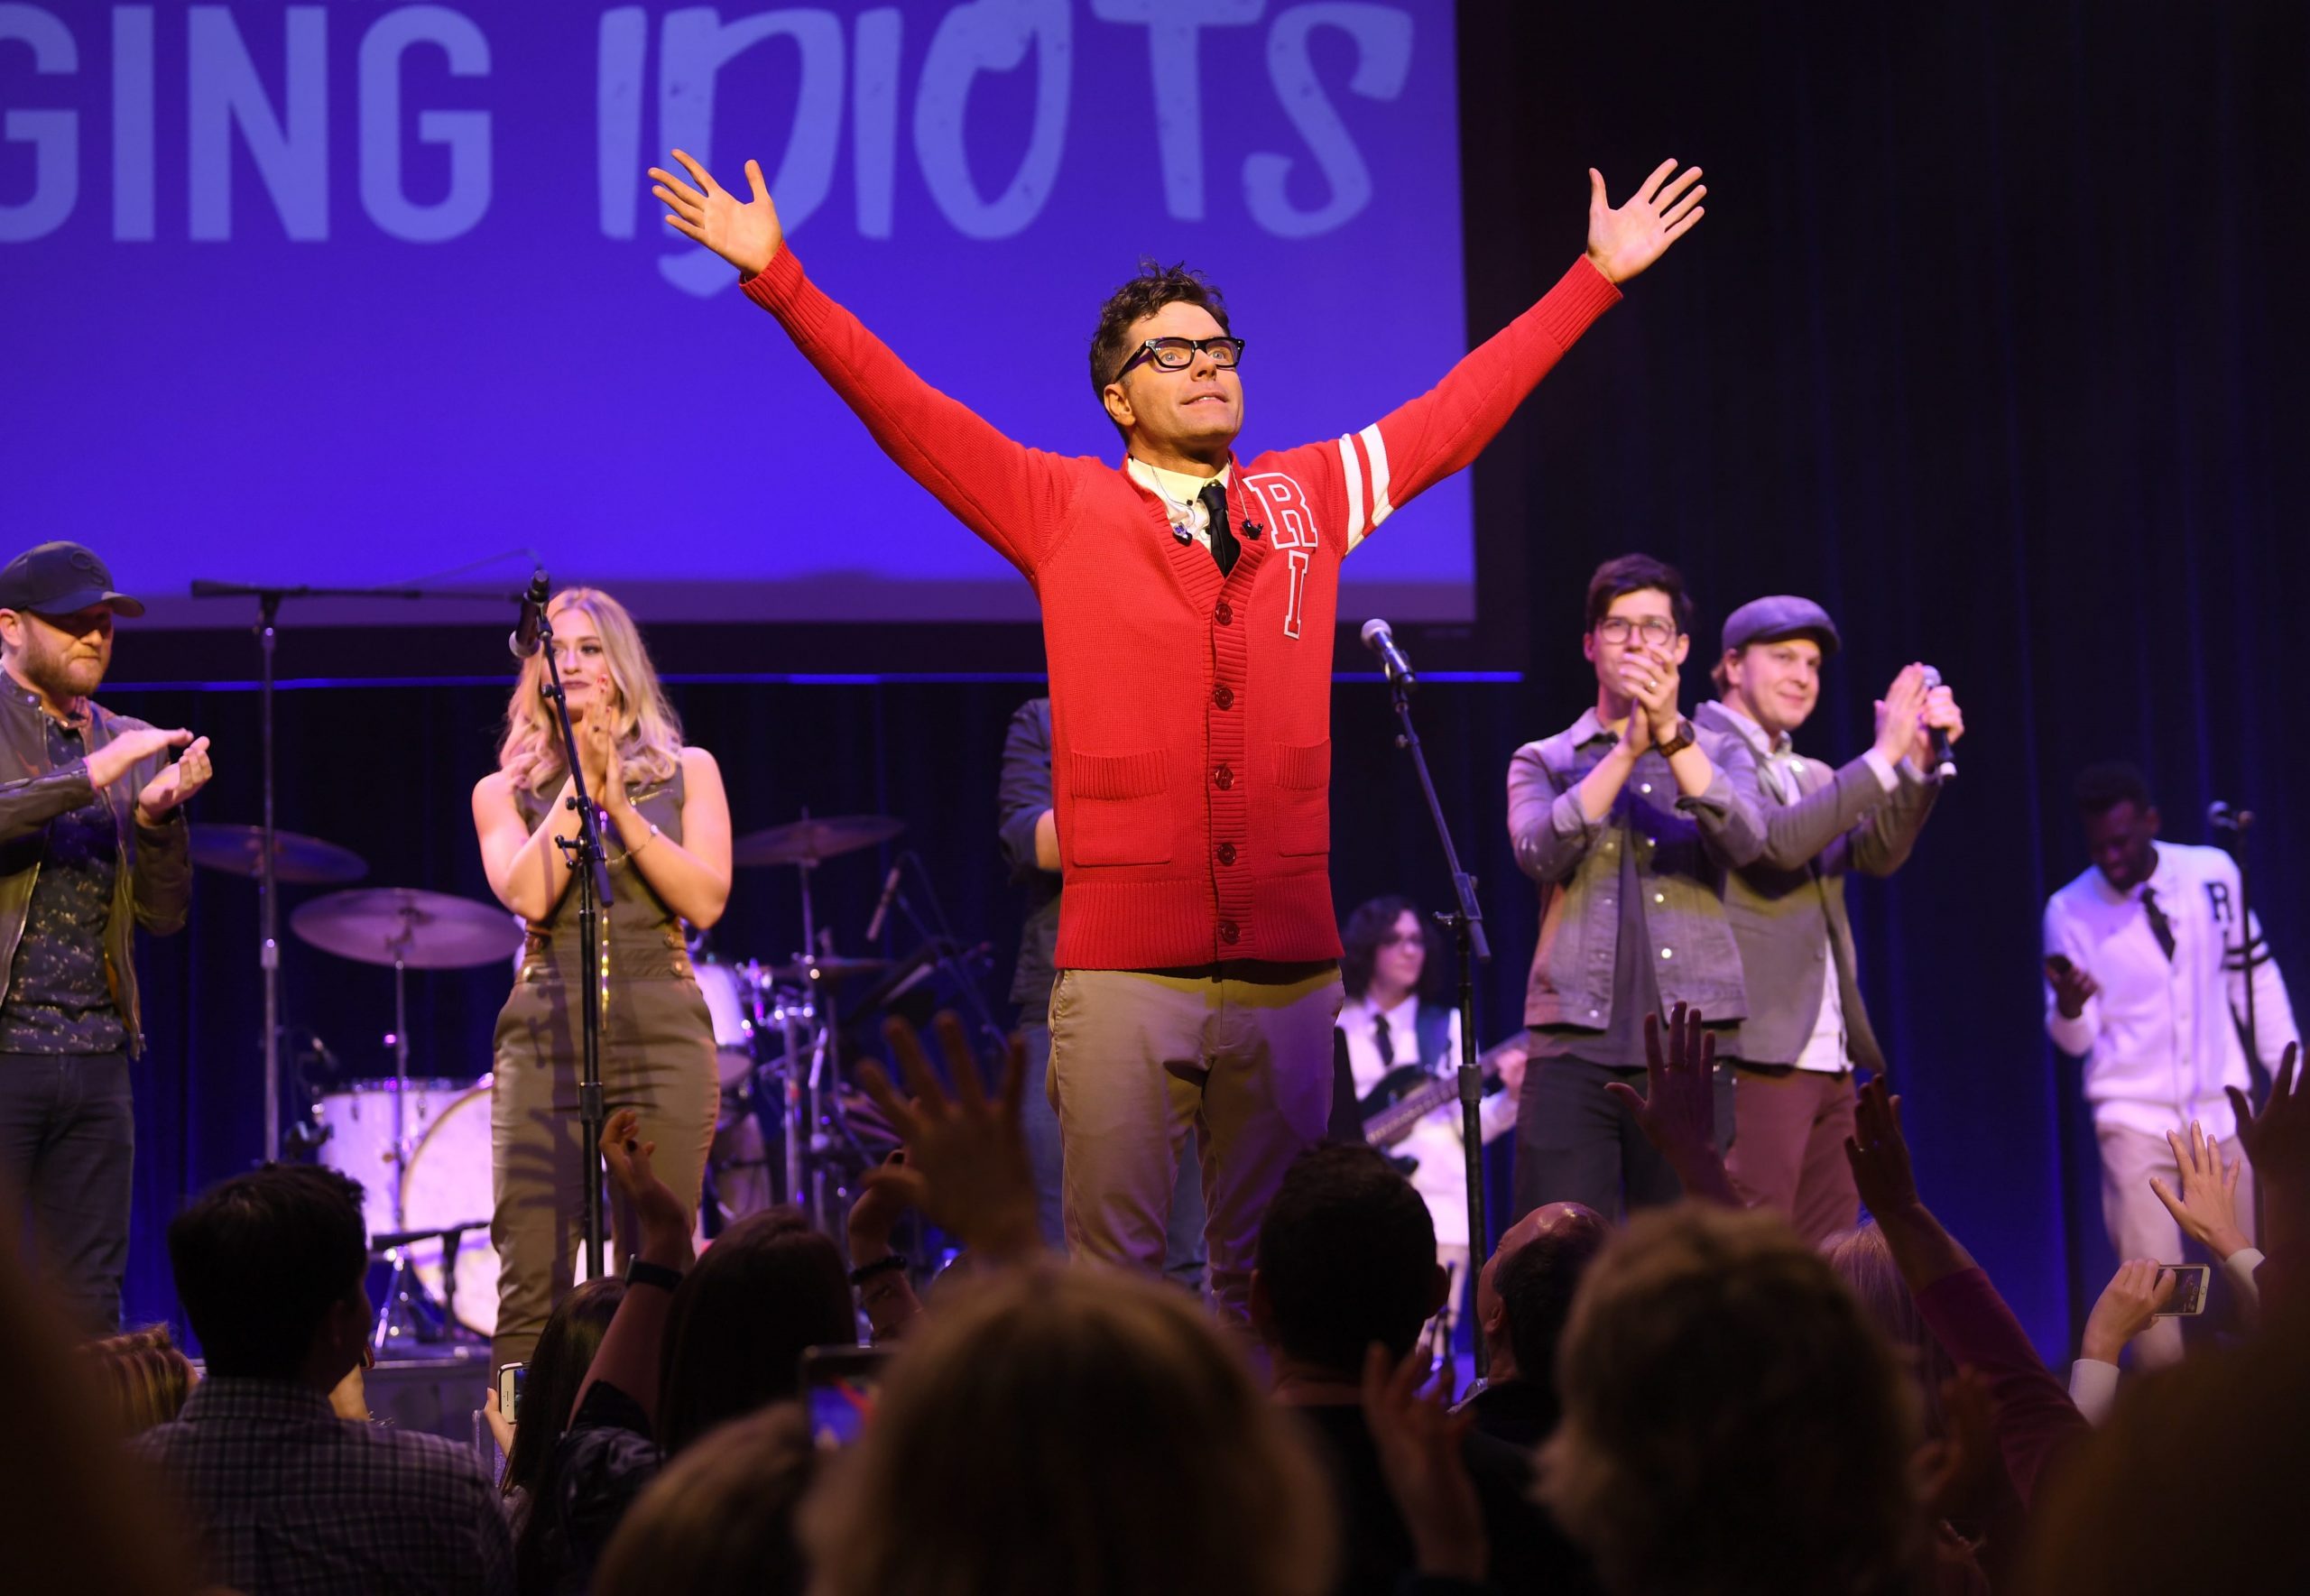 The Five Most Memorable Moments at Bobby Bones' Million Dollar Show